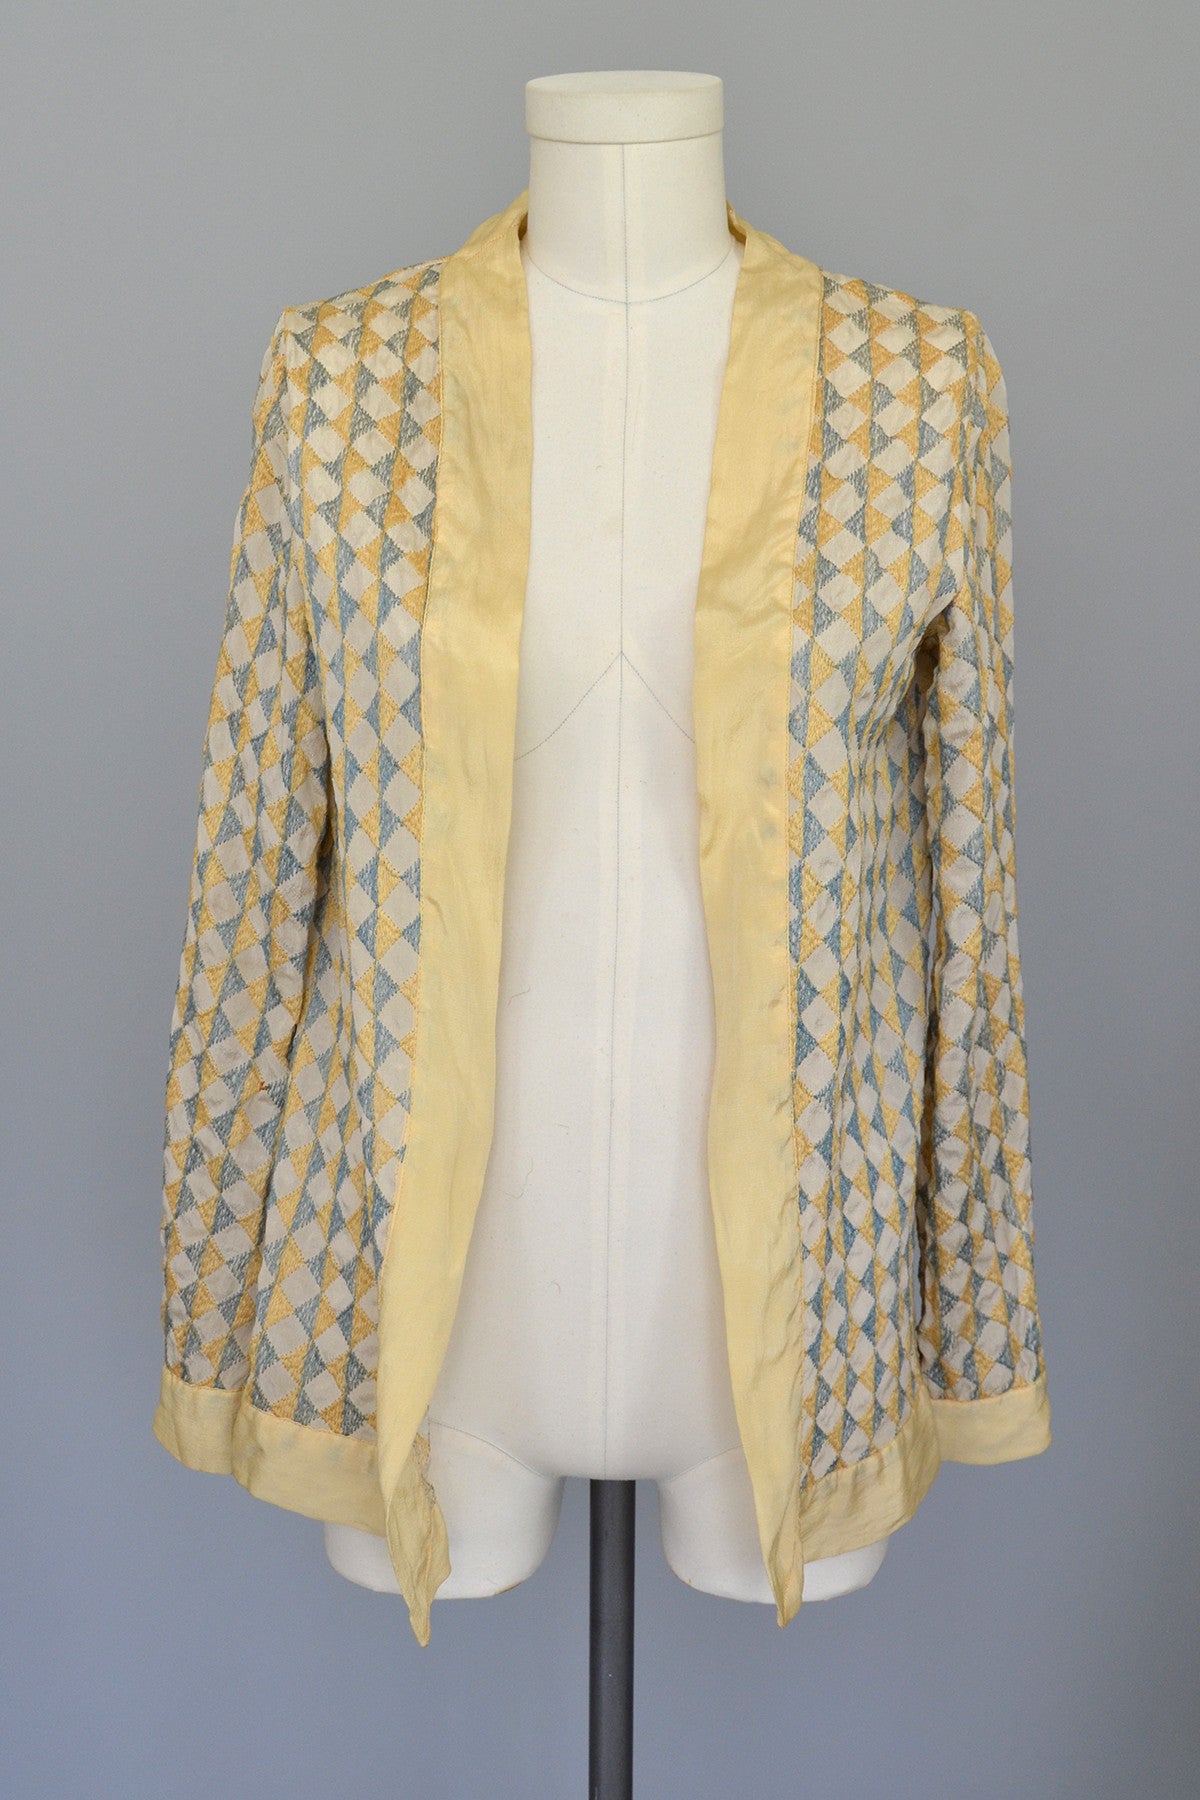 RESERVED 1920s Deco Harlequin Embroidered Jacket Duster | VintageVirtuosa